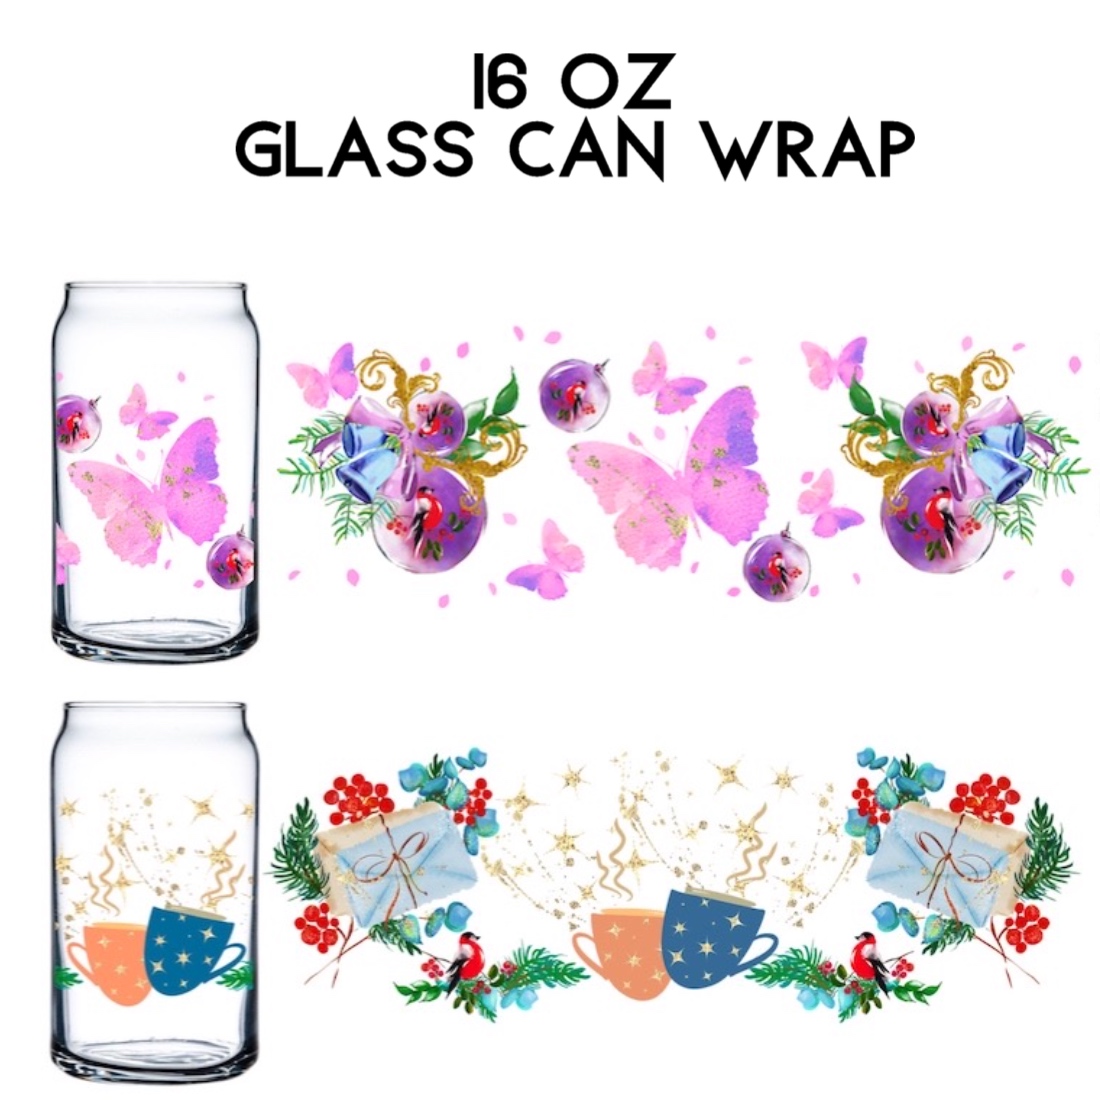 Glass Holiday Patterns GraphicsDesign cover image.